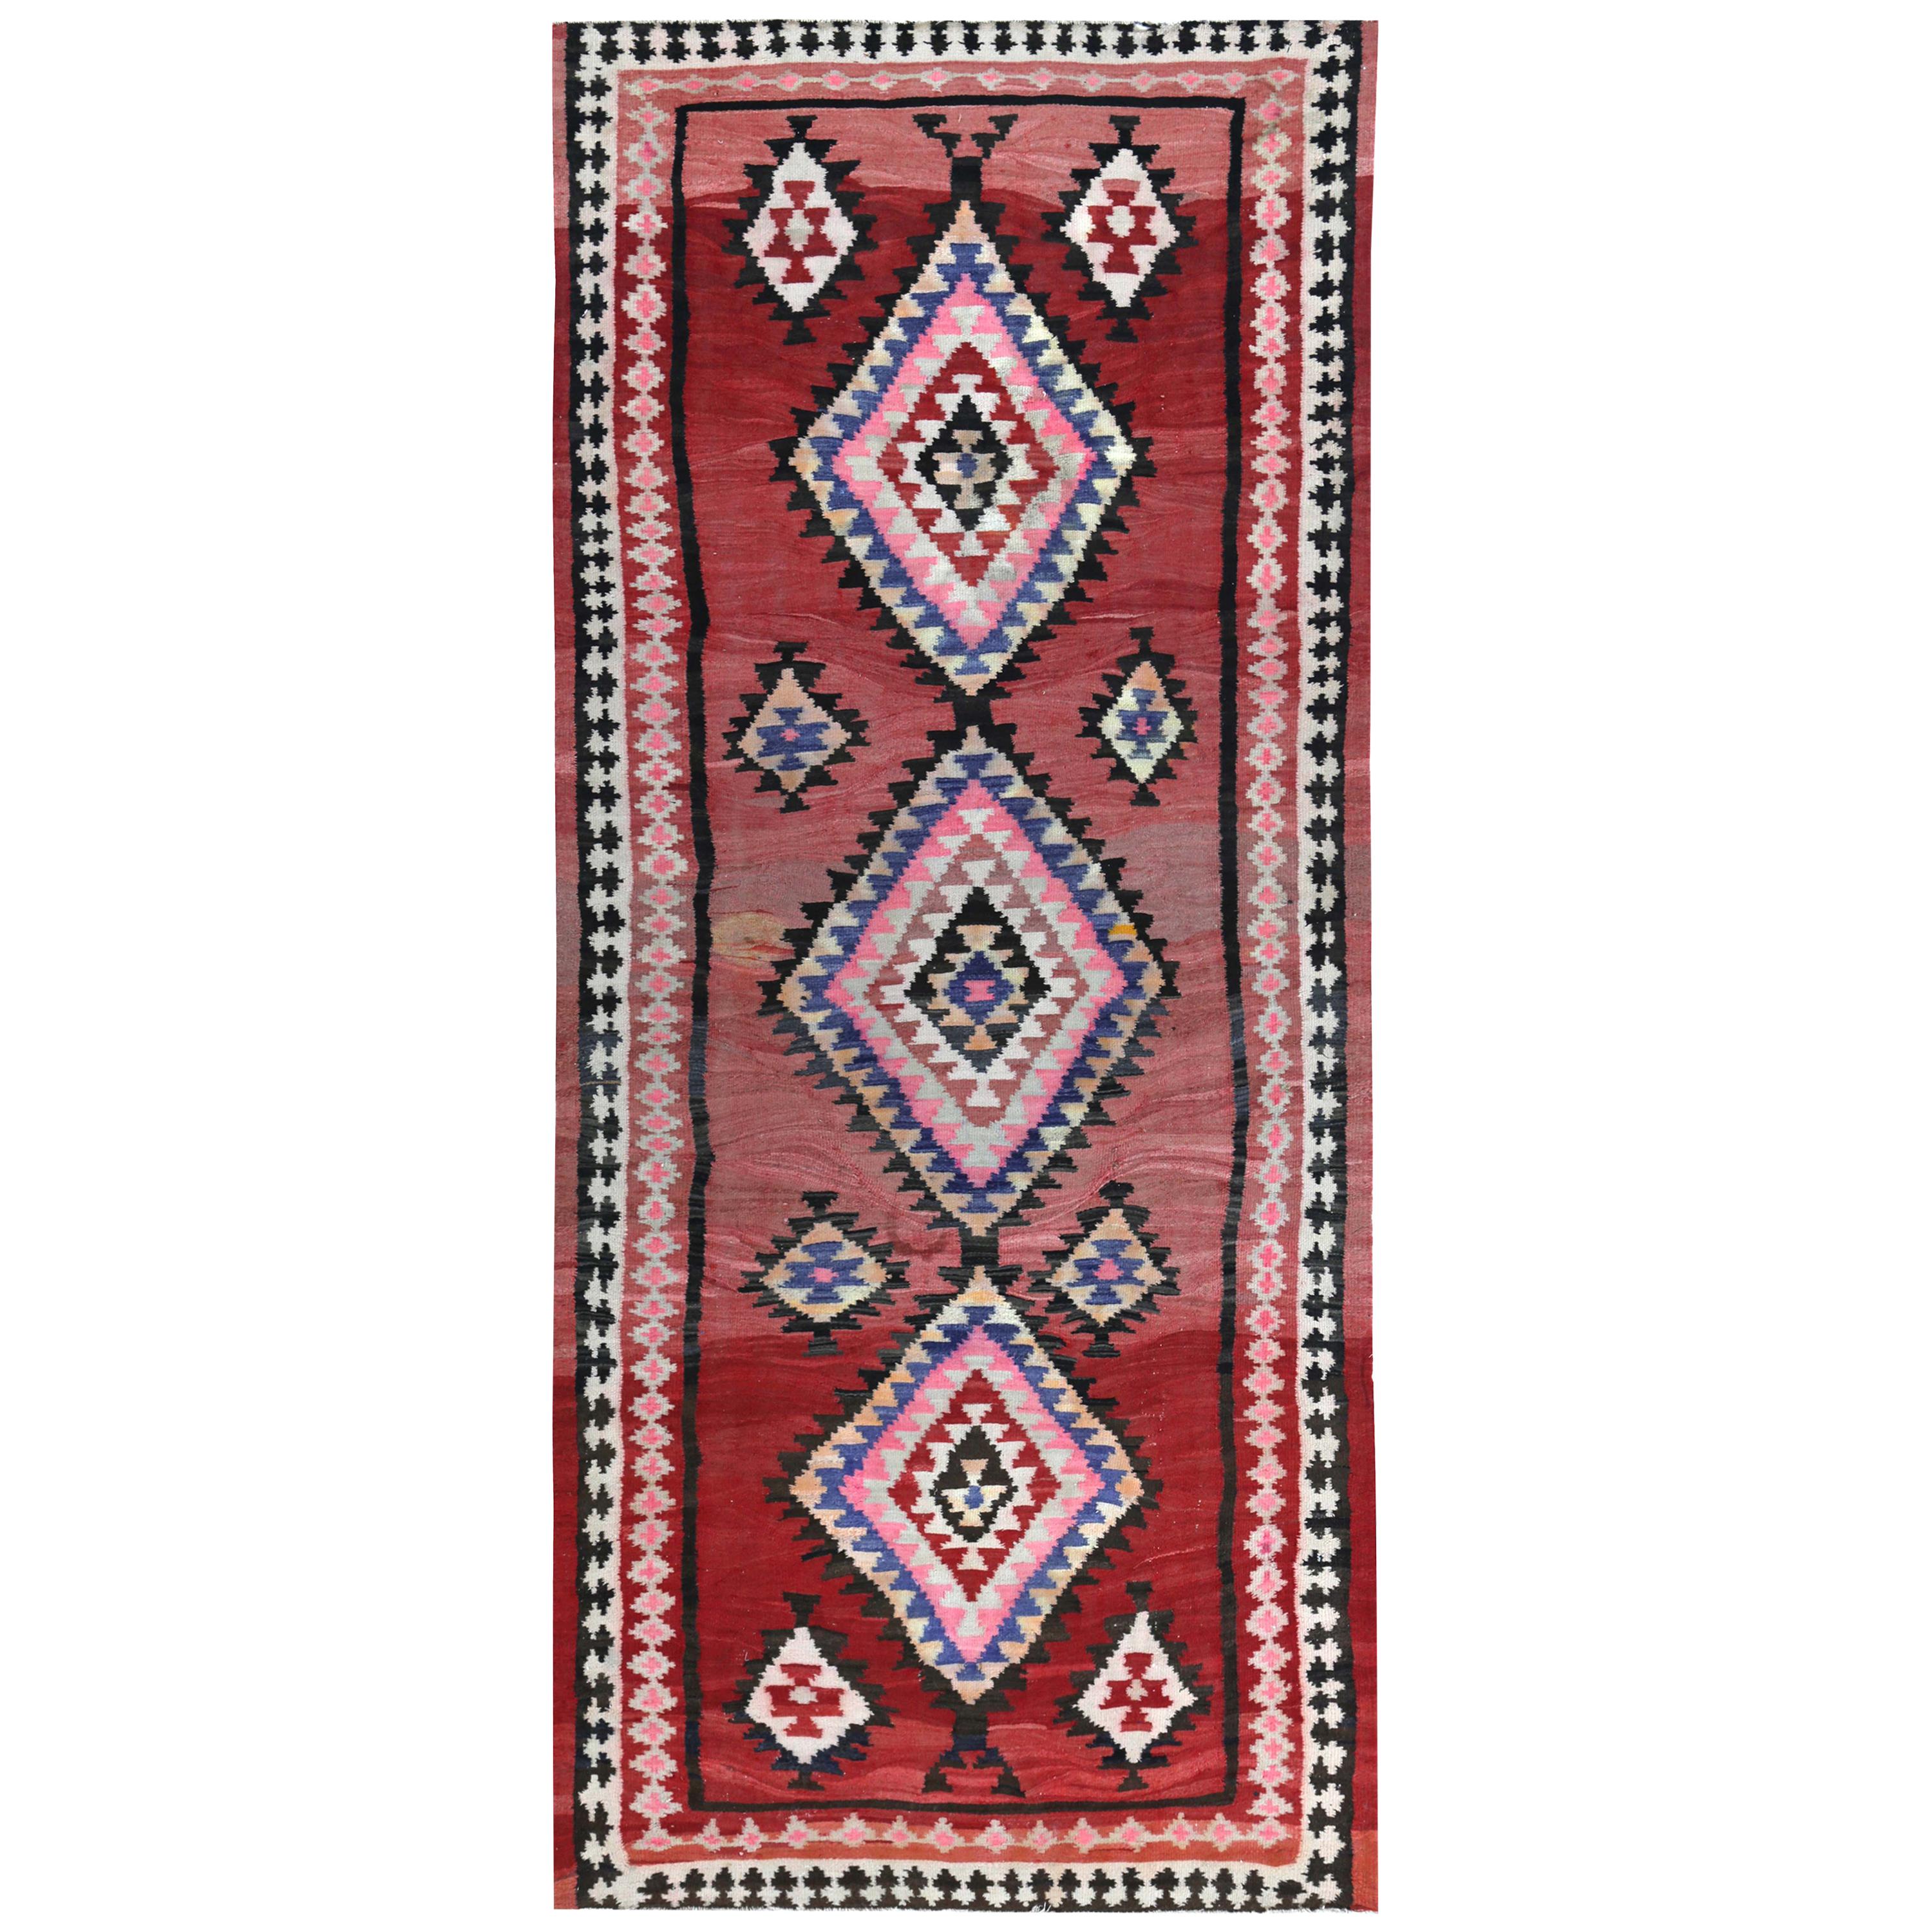 Turkish Kilim Runner Rug with Red, Pink and White Diamond Pattern For Sale